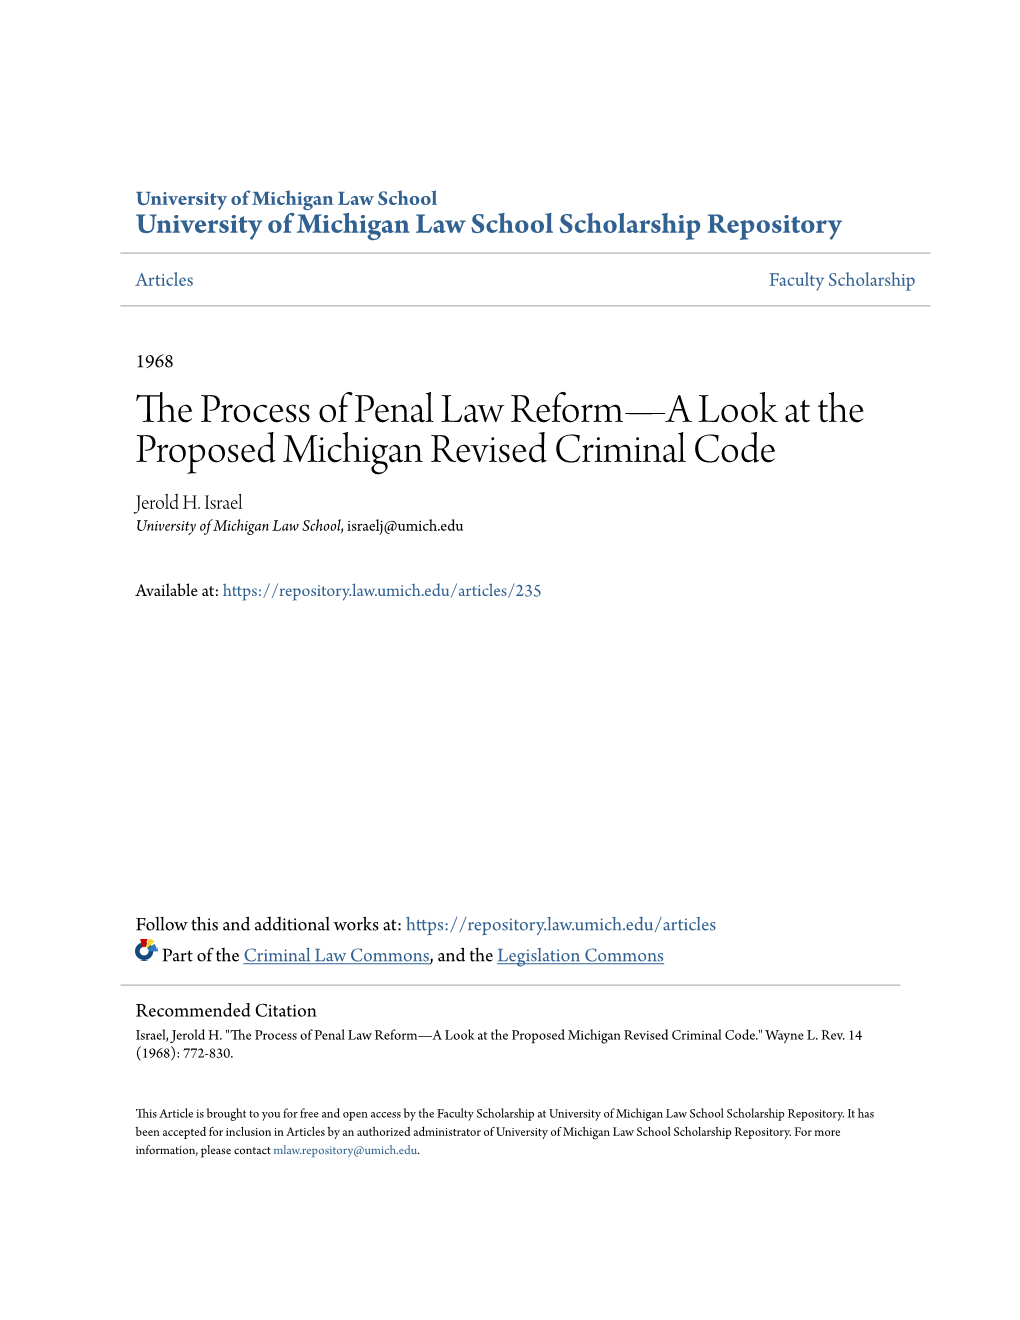 The Process of Penal Law Reform—A Look at the Proposed Michigan